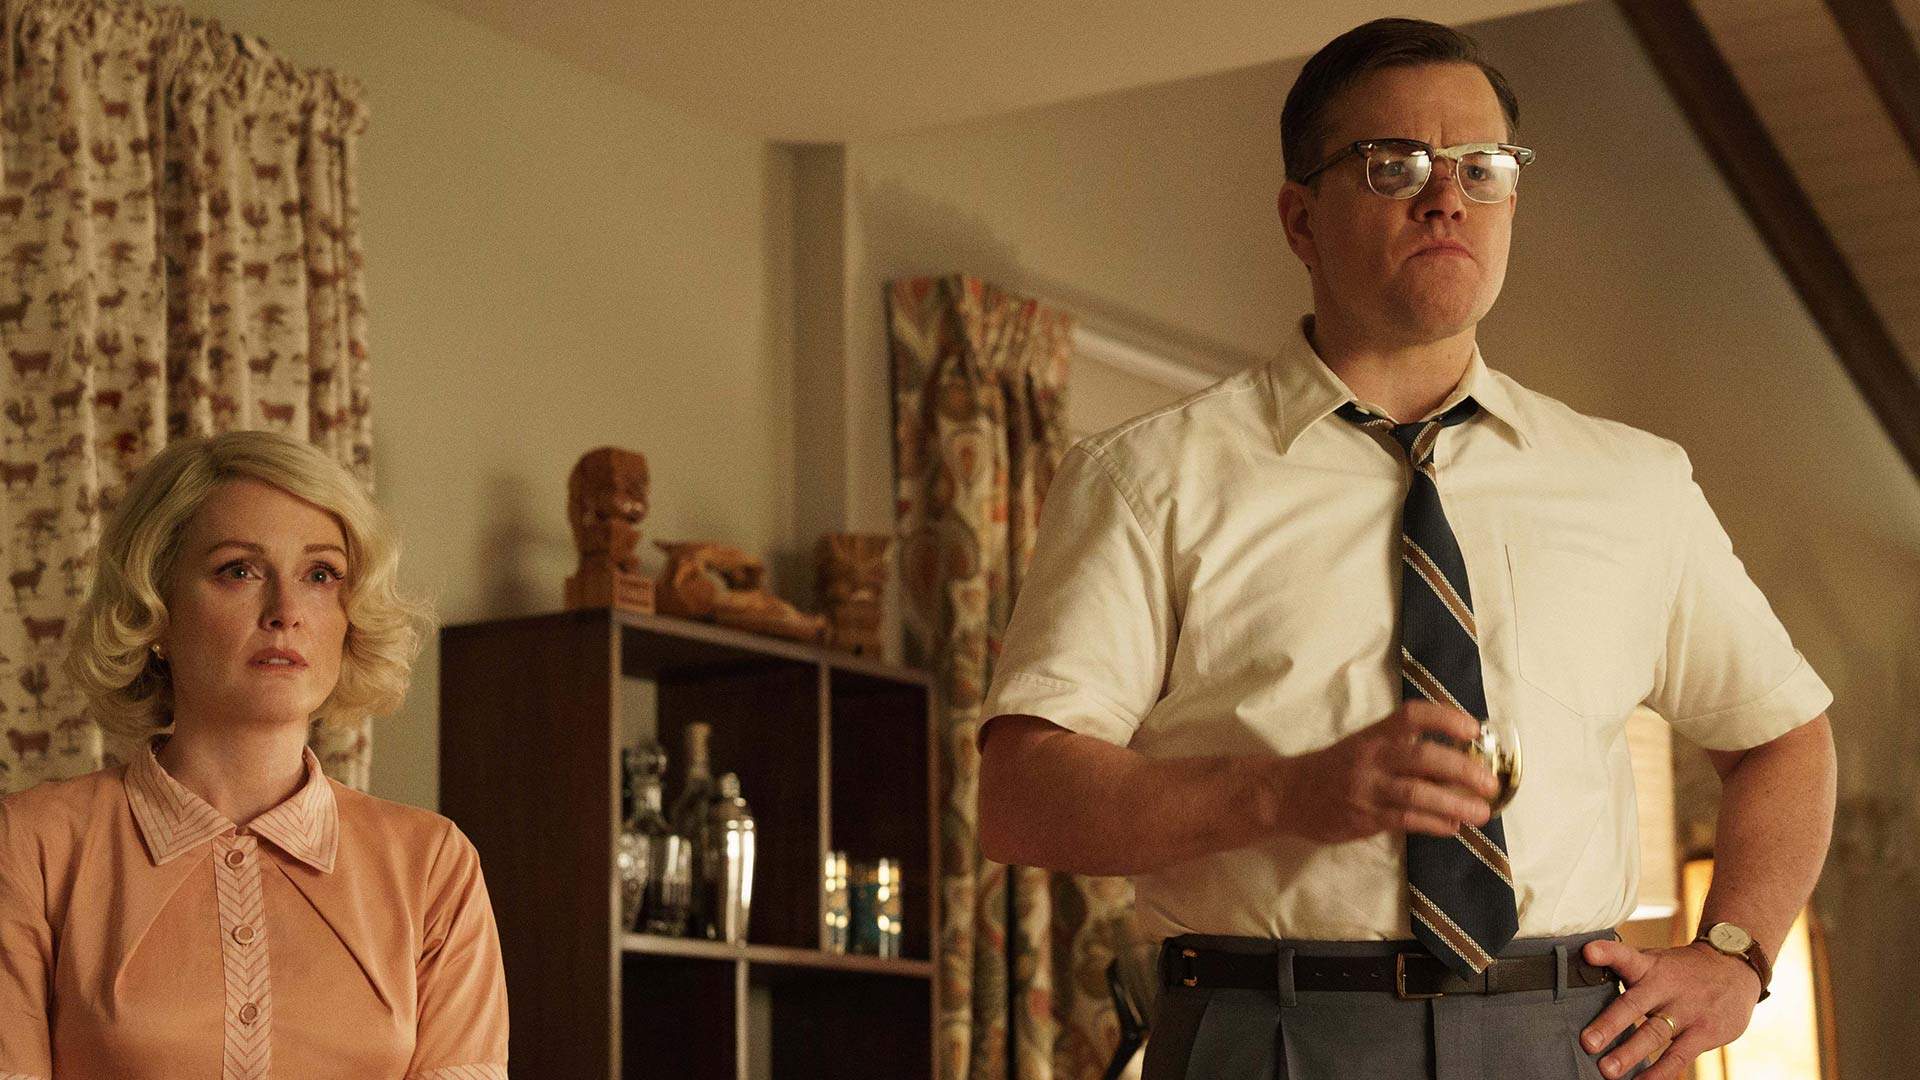 We're Giving Away Double Passes to an Early Screening of Suburbicon